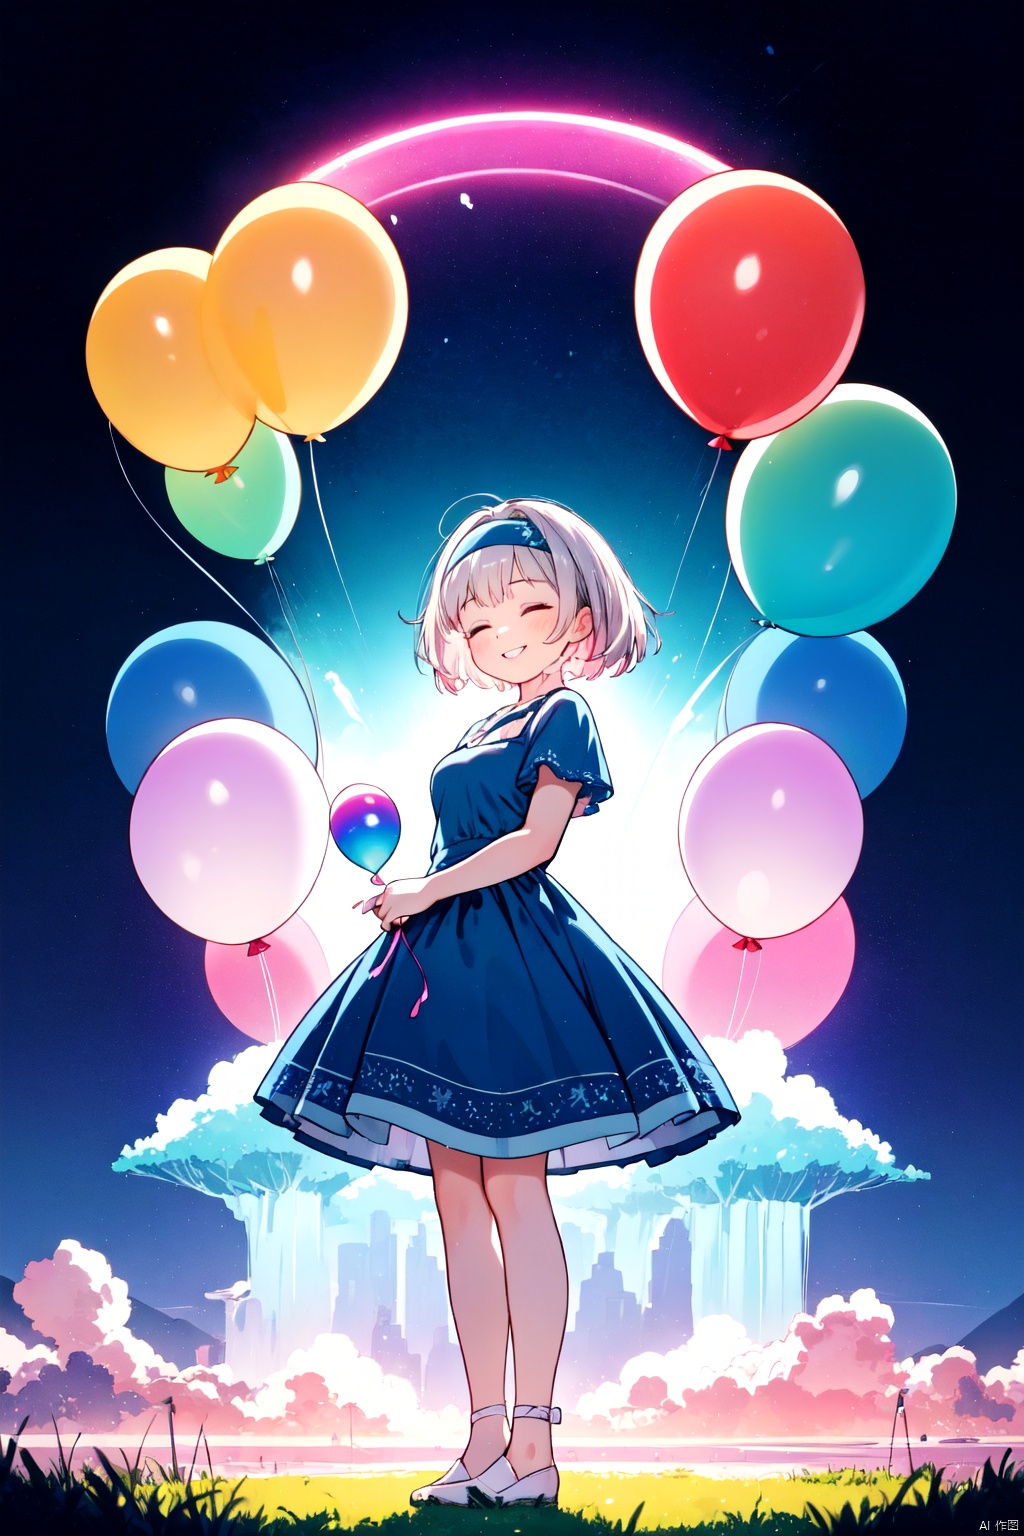 A girl wearing a blue dress and a pink headband, holding a pink balloon, standing under a vibrant rainbow. Her eyes are gently closed, and a pure, innocent smile graces her lips. The background features a series of brilliant rainbows, radiating vivid and captivating colors, creating a fantastical dream-like setting. The scene is depicted with HDR, ultra-fine painting quality, and sharp focus. The art style blends portraits and dreamy landscapes, emphasizing the girl's serene presence beneath the rainbow. The lighting should enhance the magical and sweet atmosphere of the scene, casting a soft and enchanting glow.